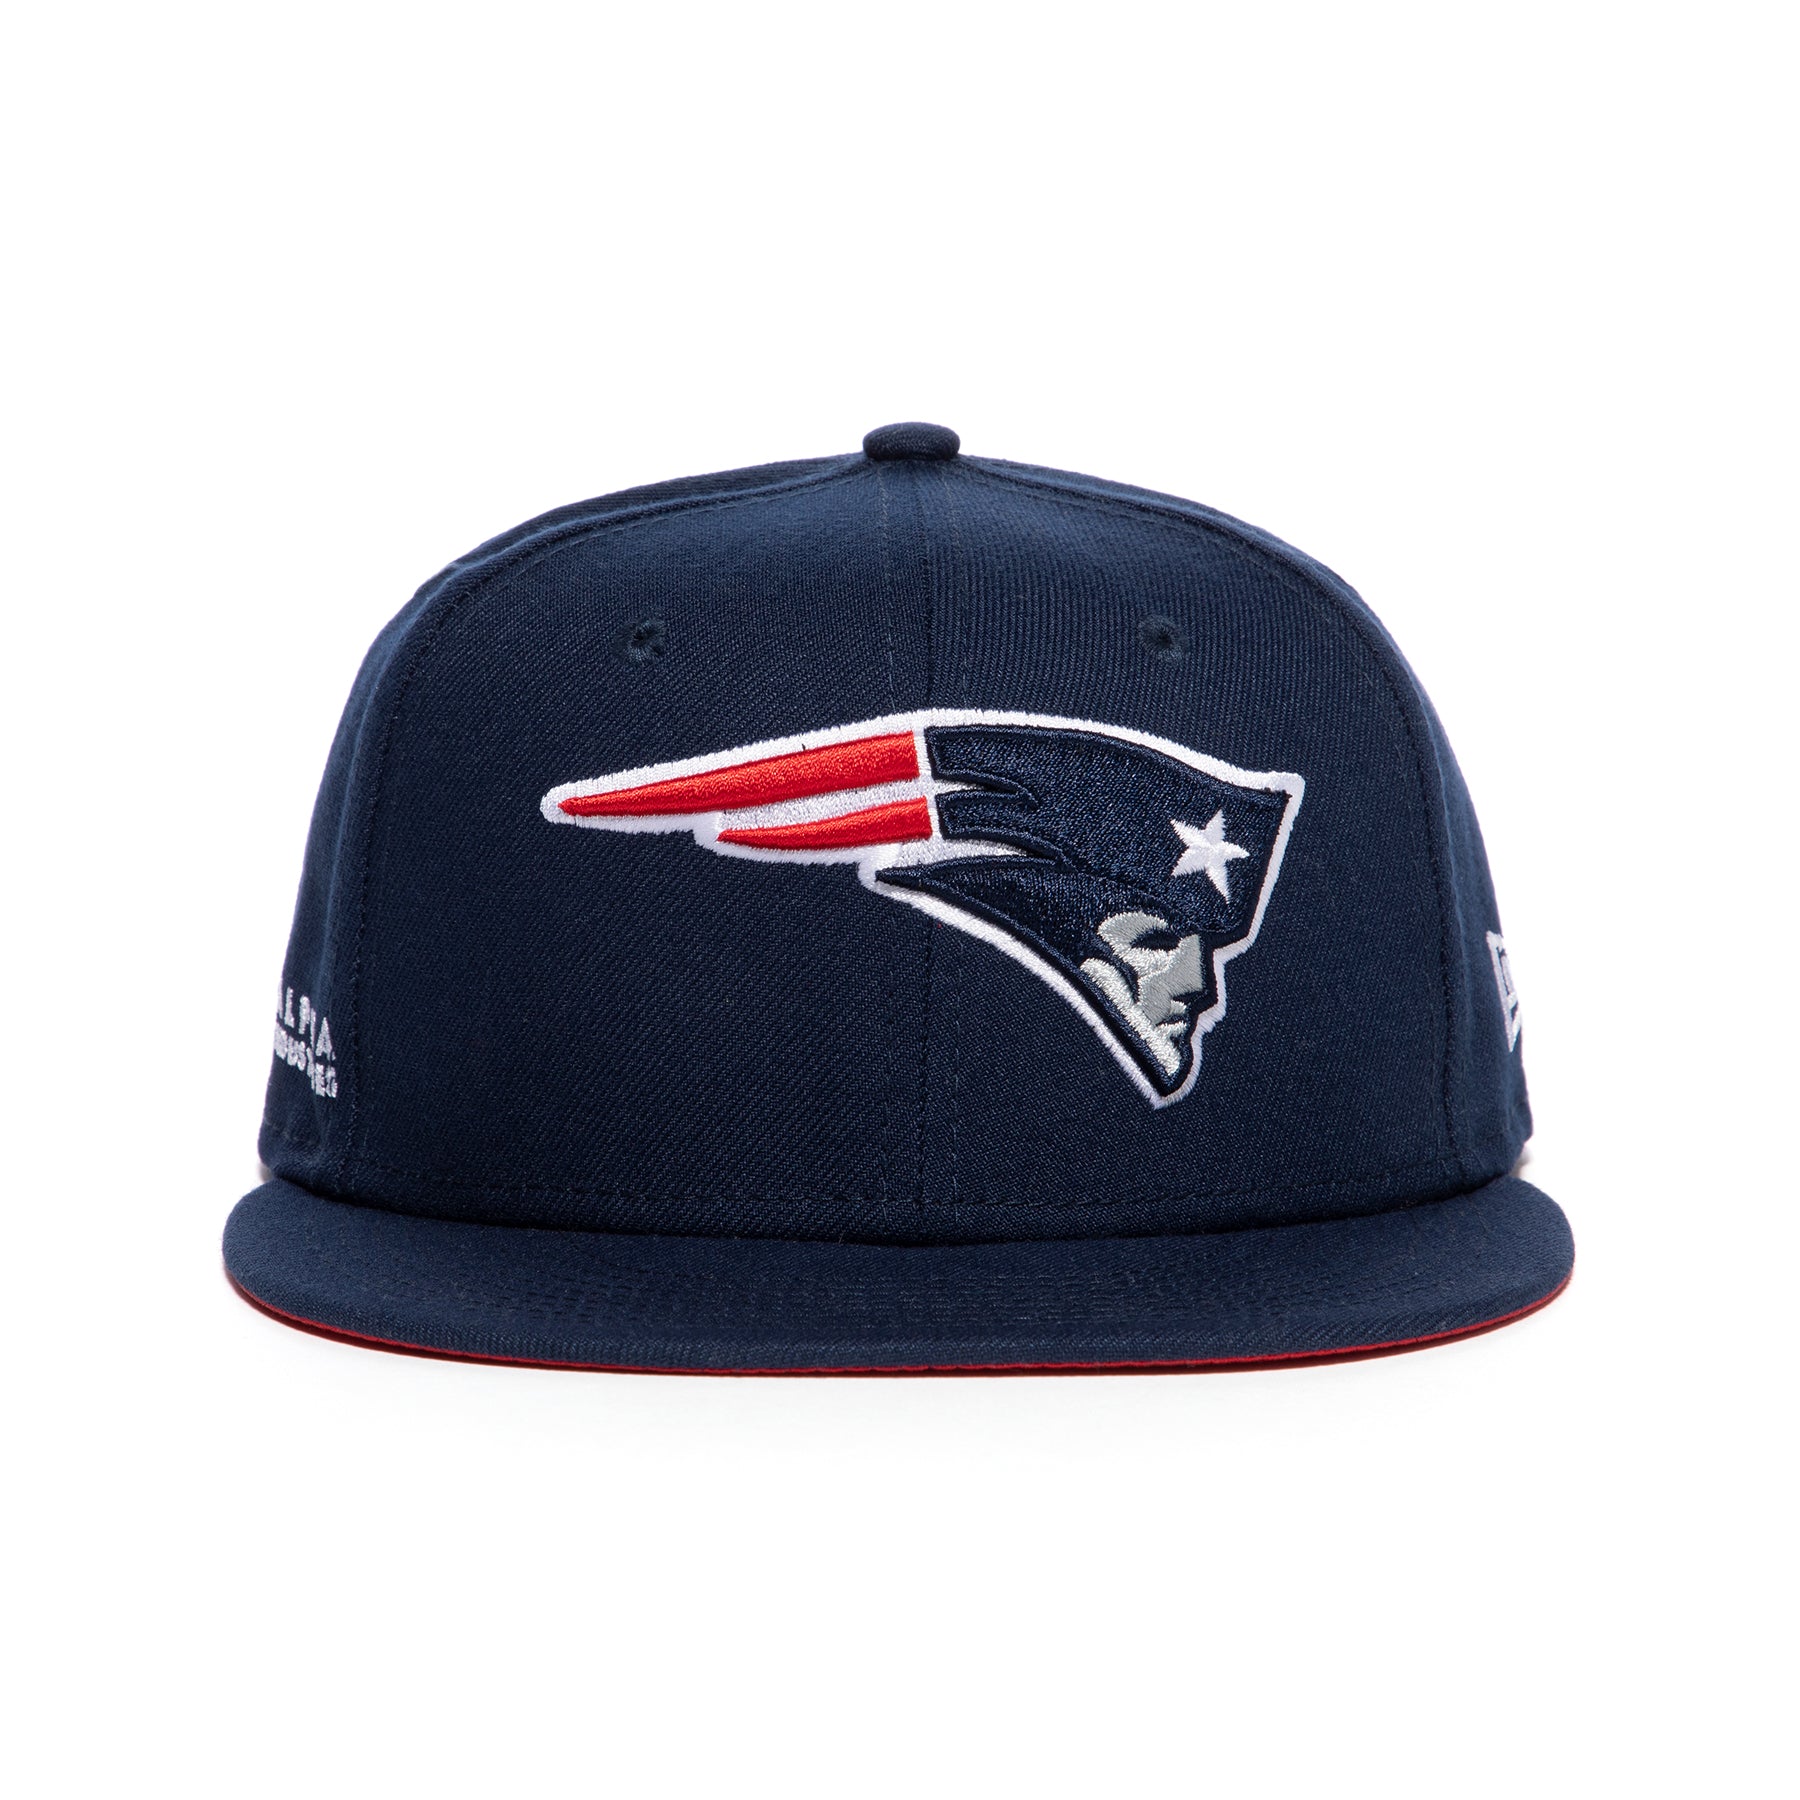 New Era New England Patriots Fitted x Concepts Hat – 59Fift Blue Alpha Industries